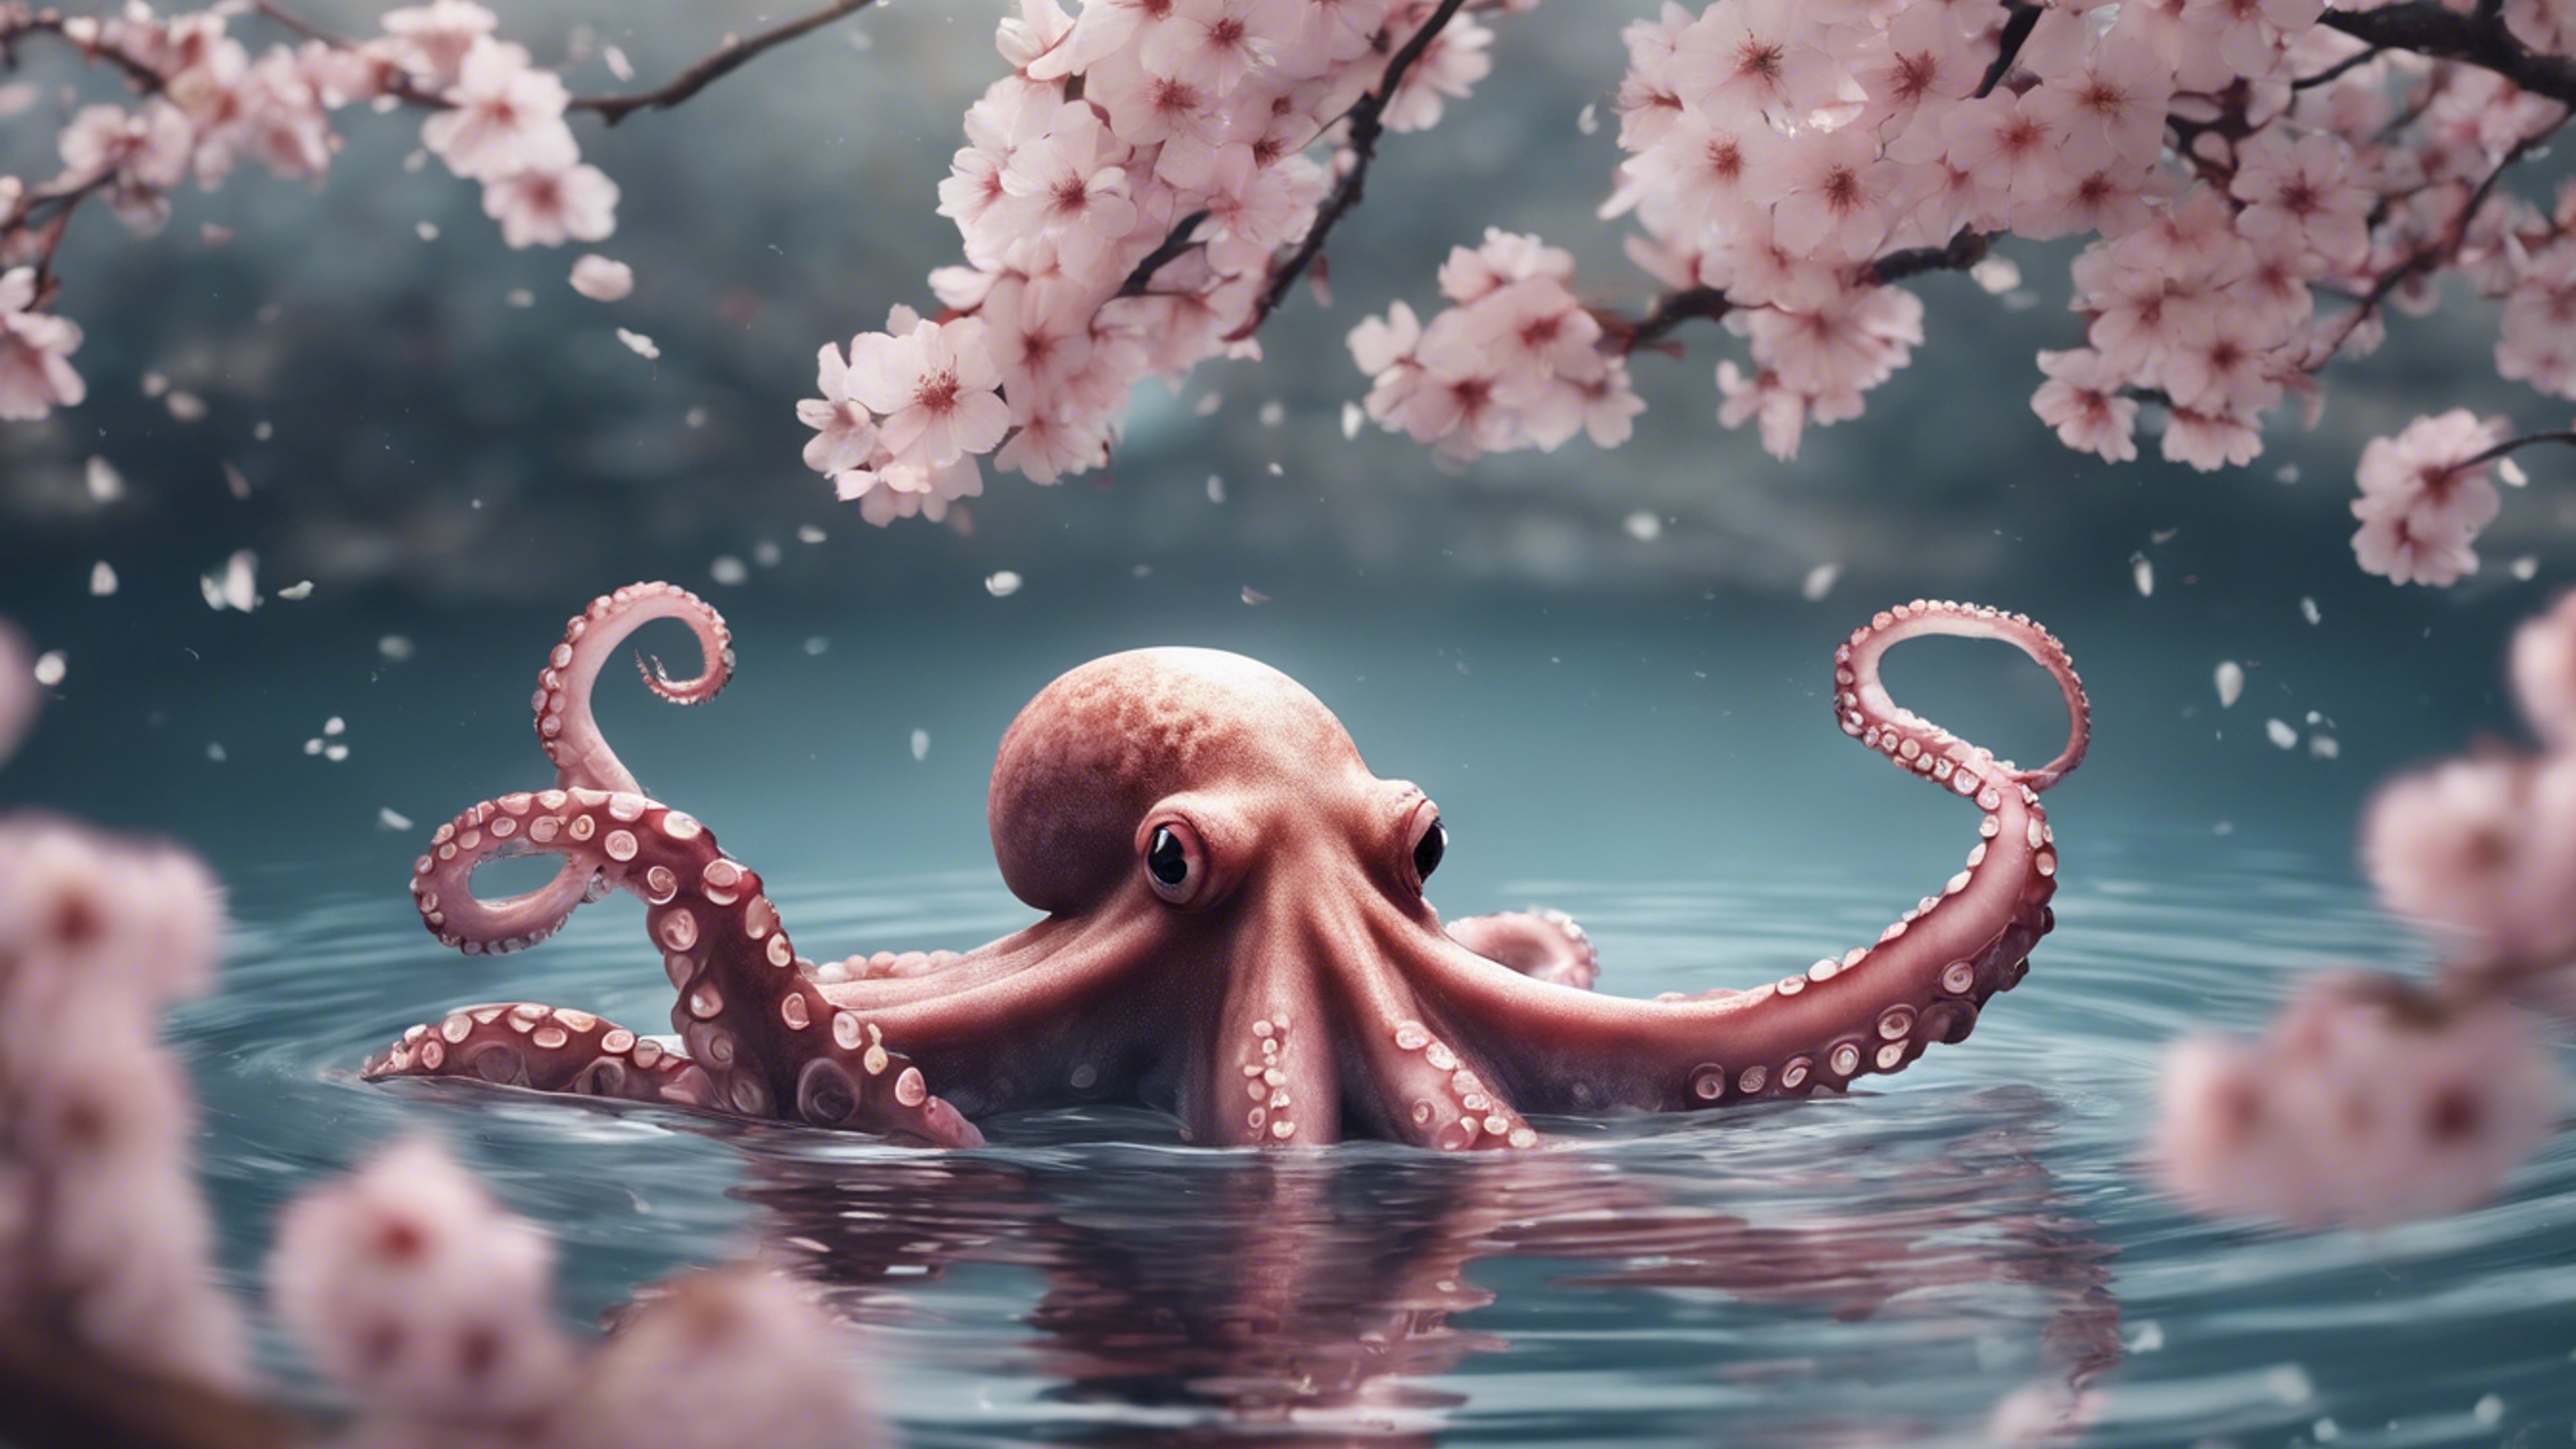 A sketch of an octopus floating peacefully in the water, with Japanese cherry blossoms gracefully falling around.壁紙[a4f14d80ca6f4b538d98]